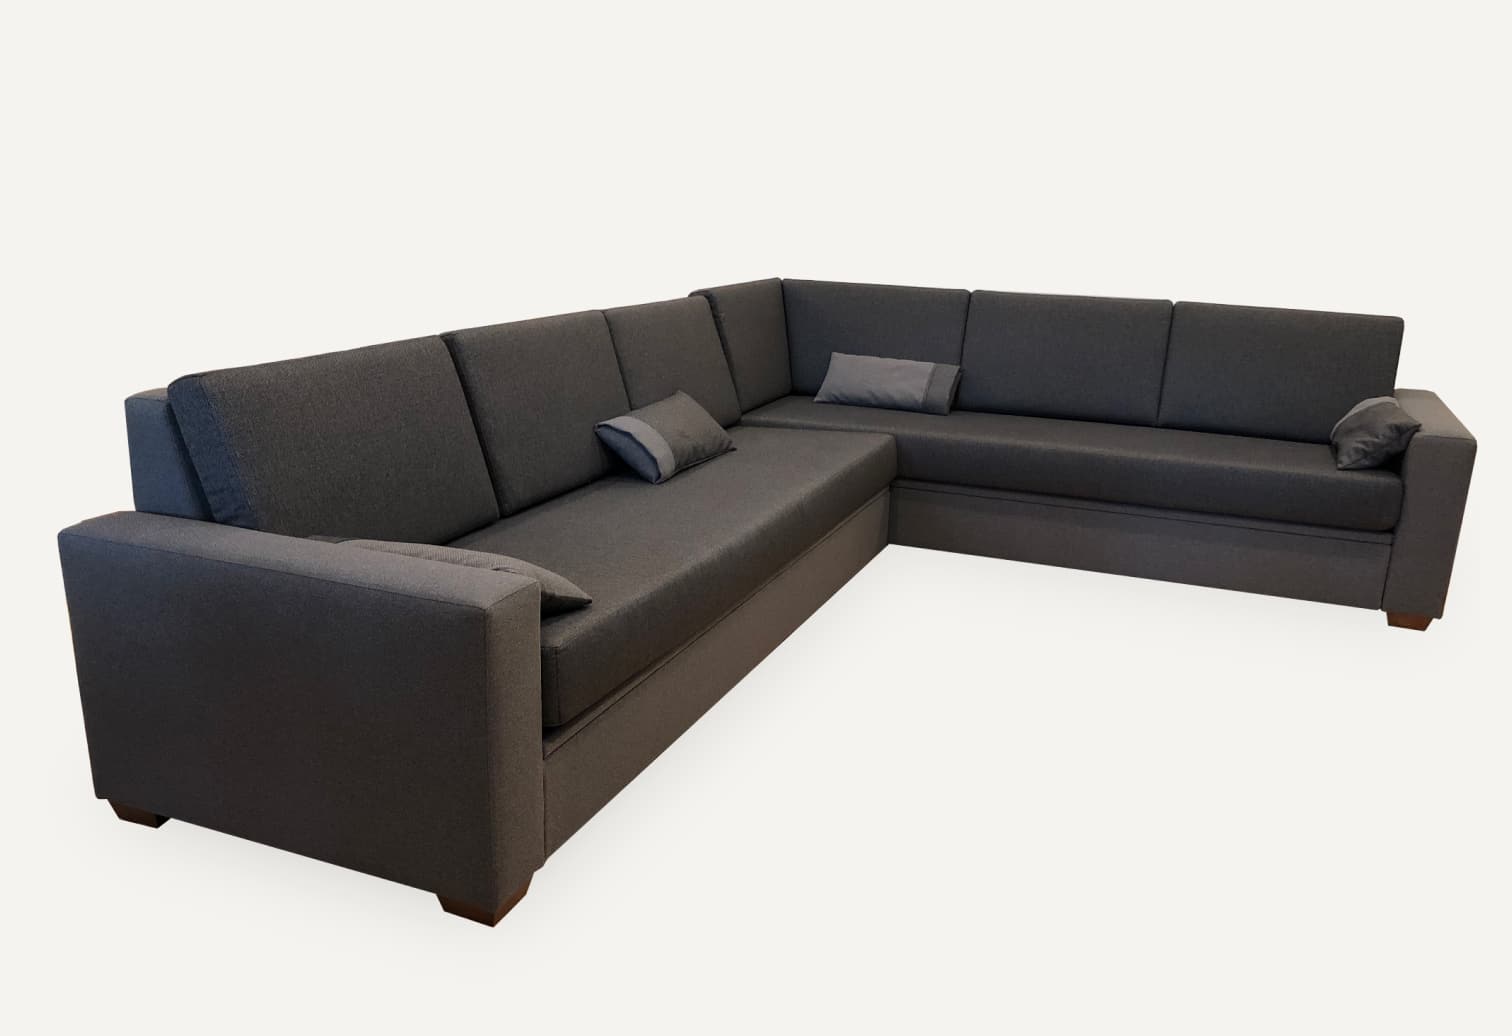 double L form sofa sectional covered with cat friendly fabric